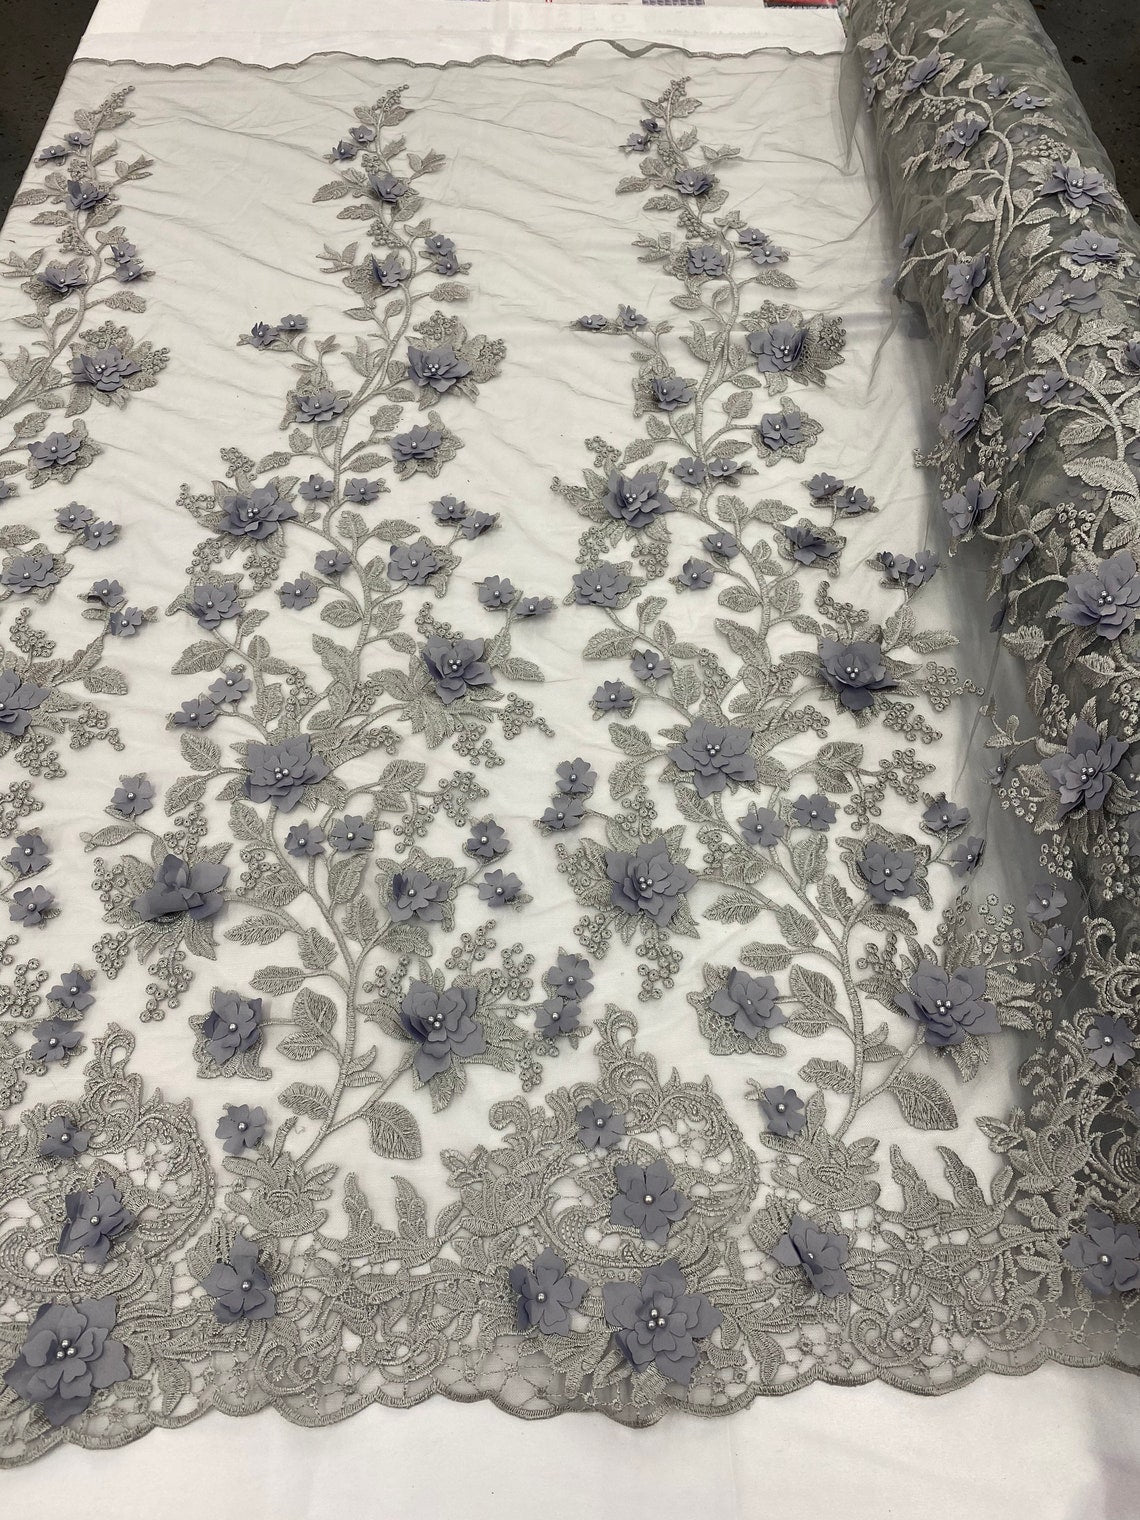 3D Floral Princess Fabric -  Silver - Embroidered Floral Lace Fabric with 3D Flowers By Yard